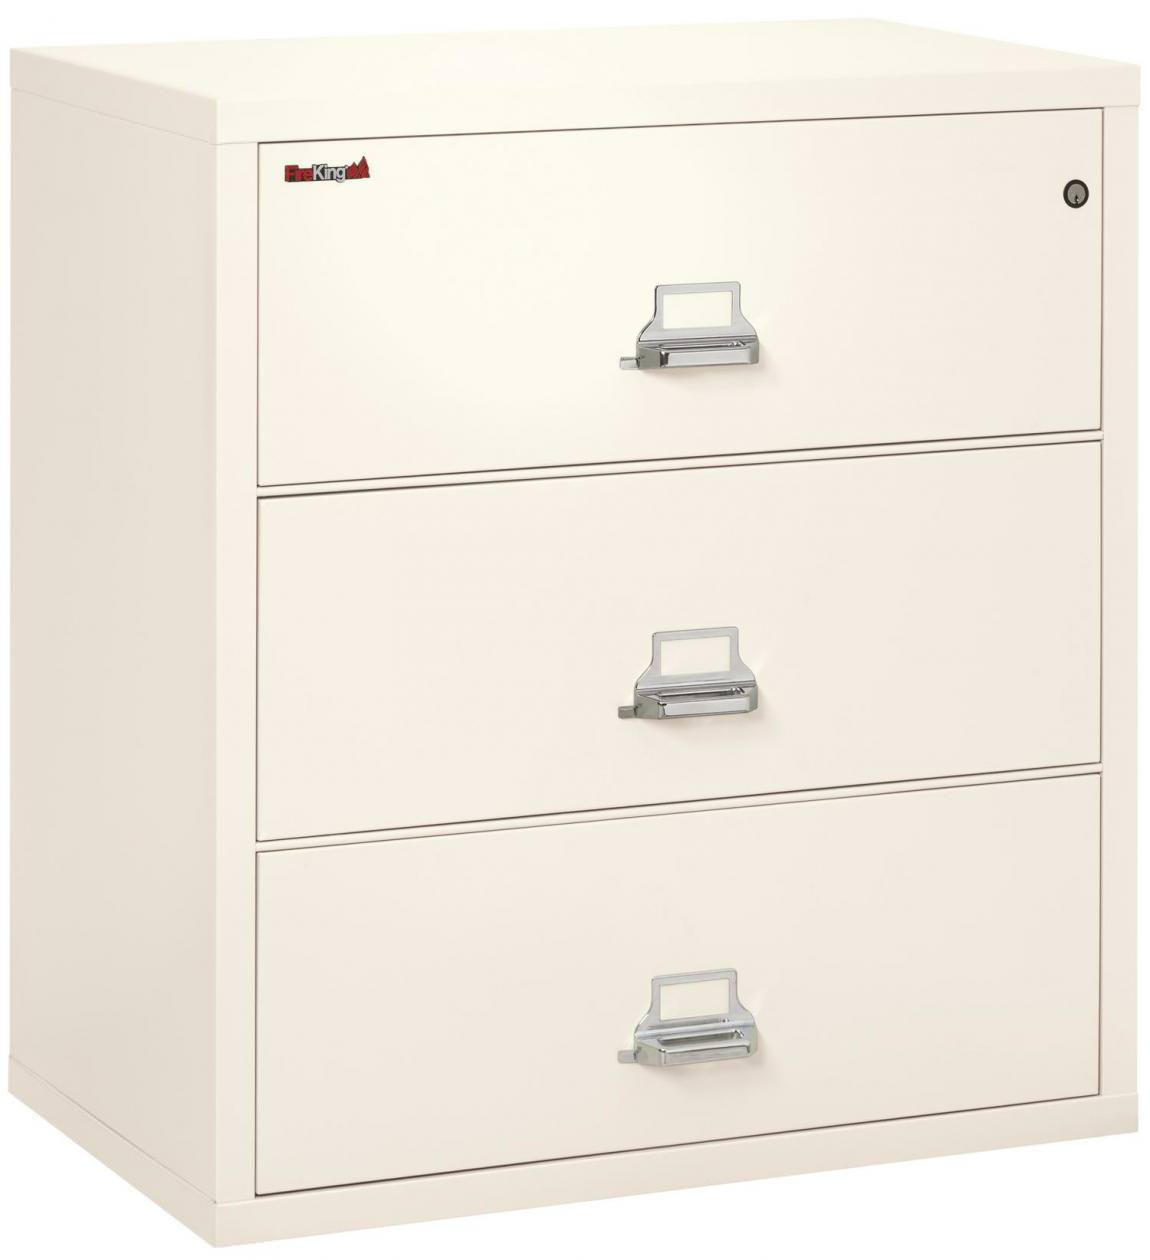 3 Drawer Fireproof Lateral File Cabinet - 38 Inch